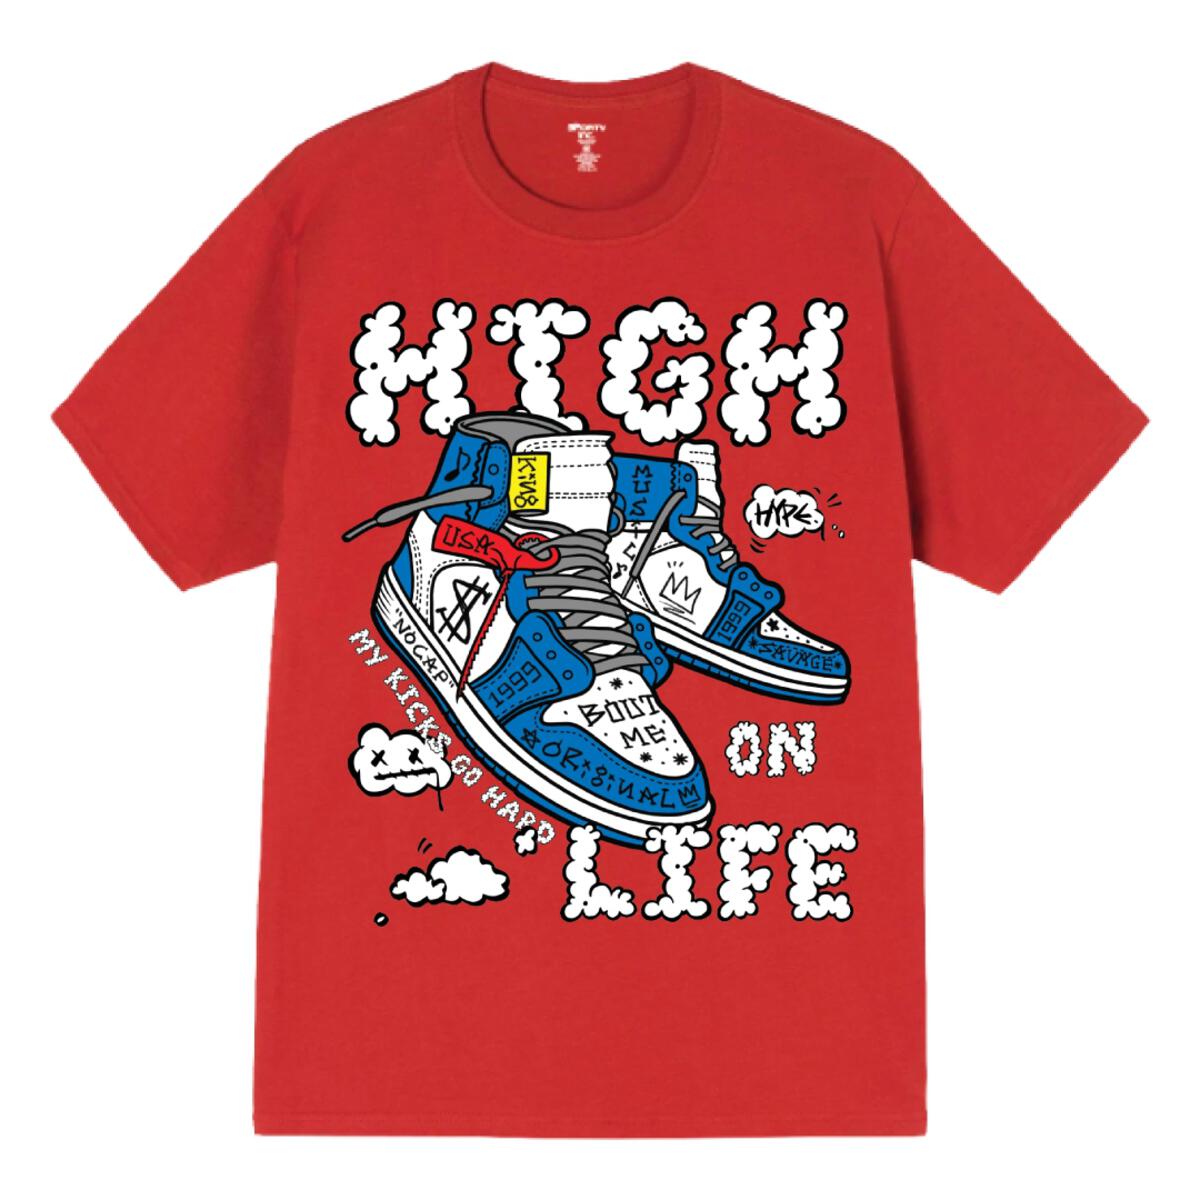 High On Life Graphic T-Shirt